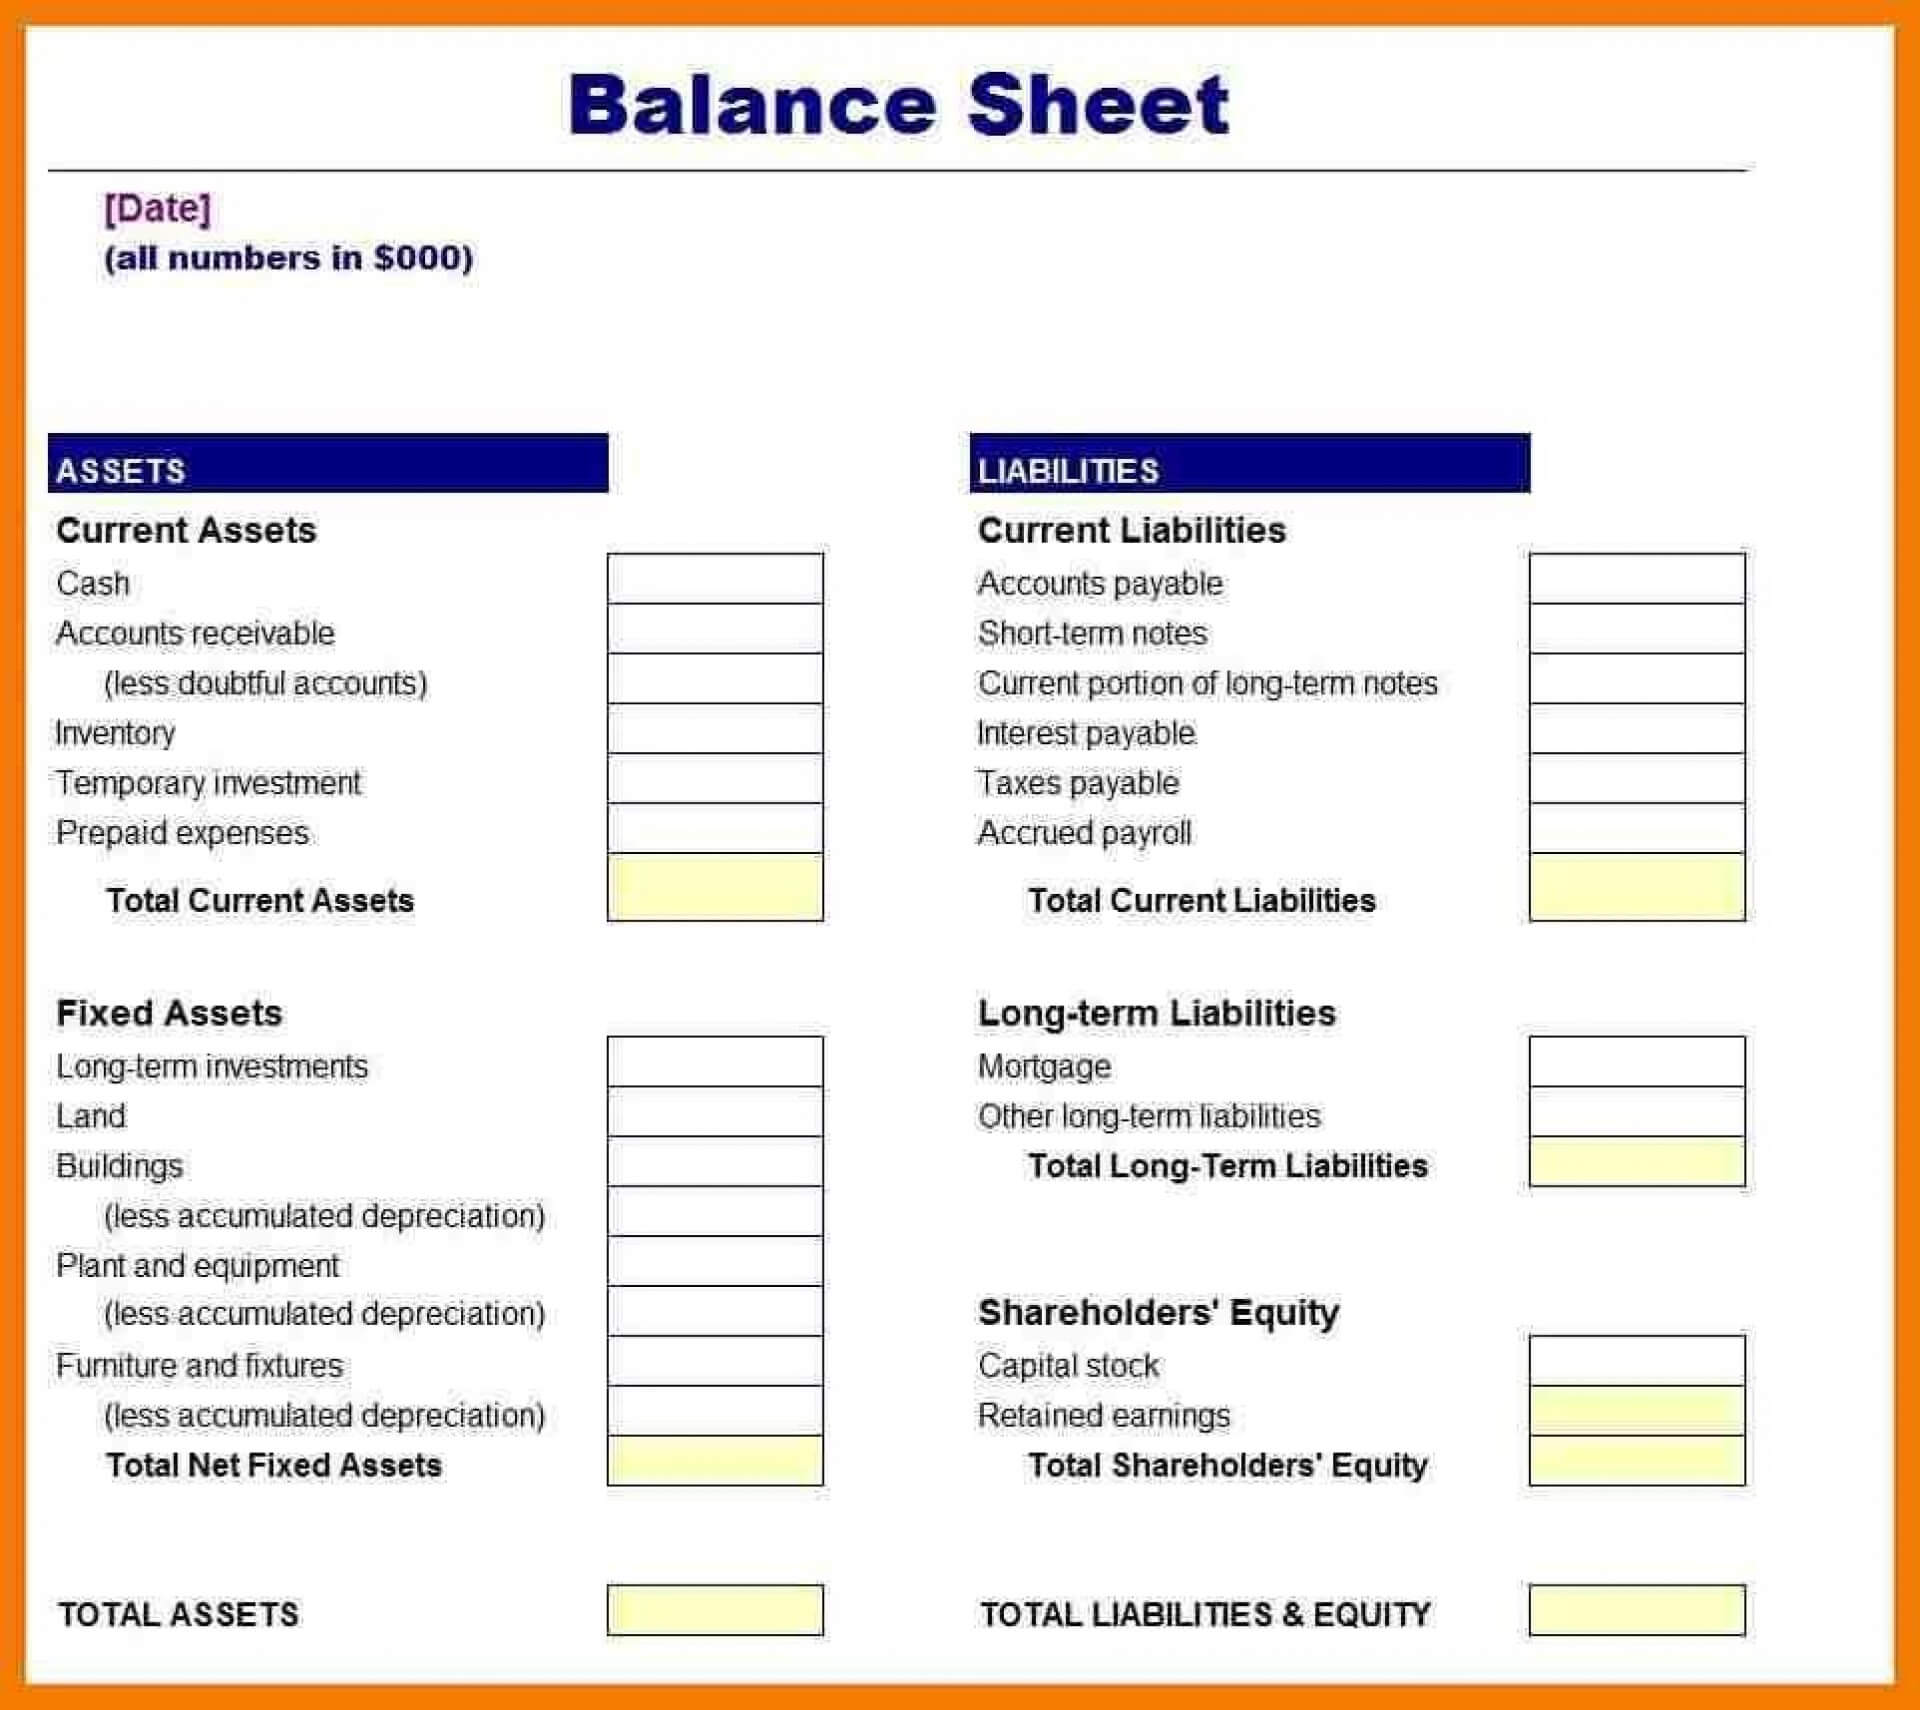 027 Balance Sheet Examples For Small Business Template Ideas Within Balance Sheet Template For Small Business